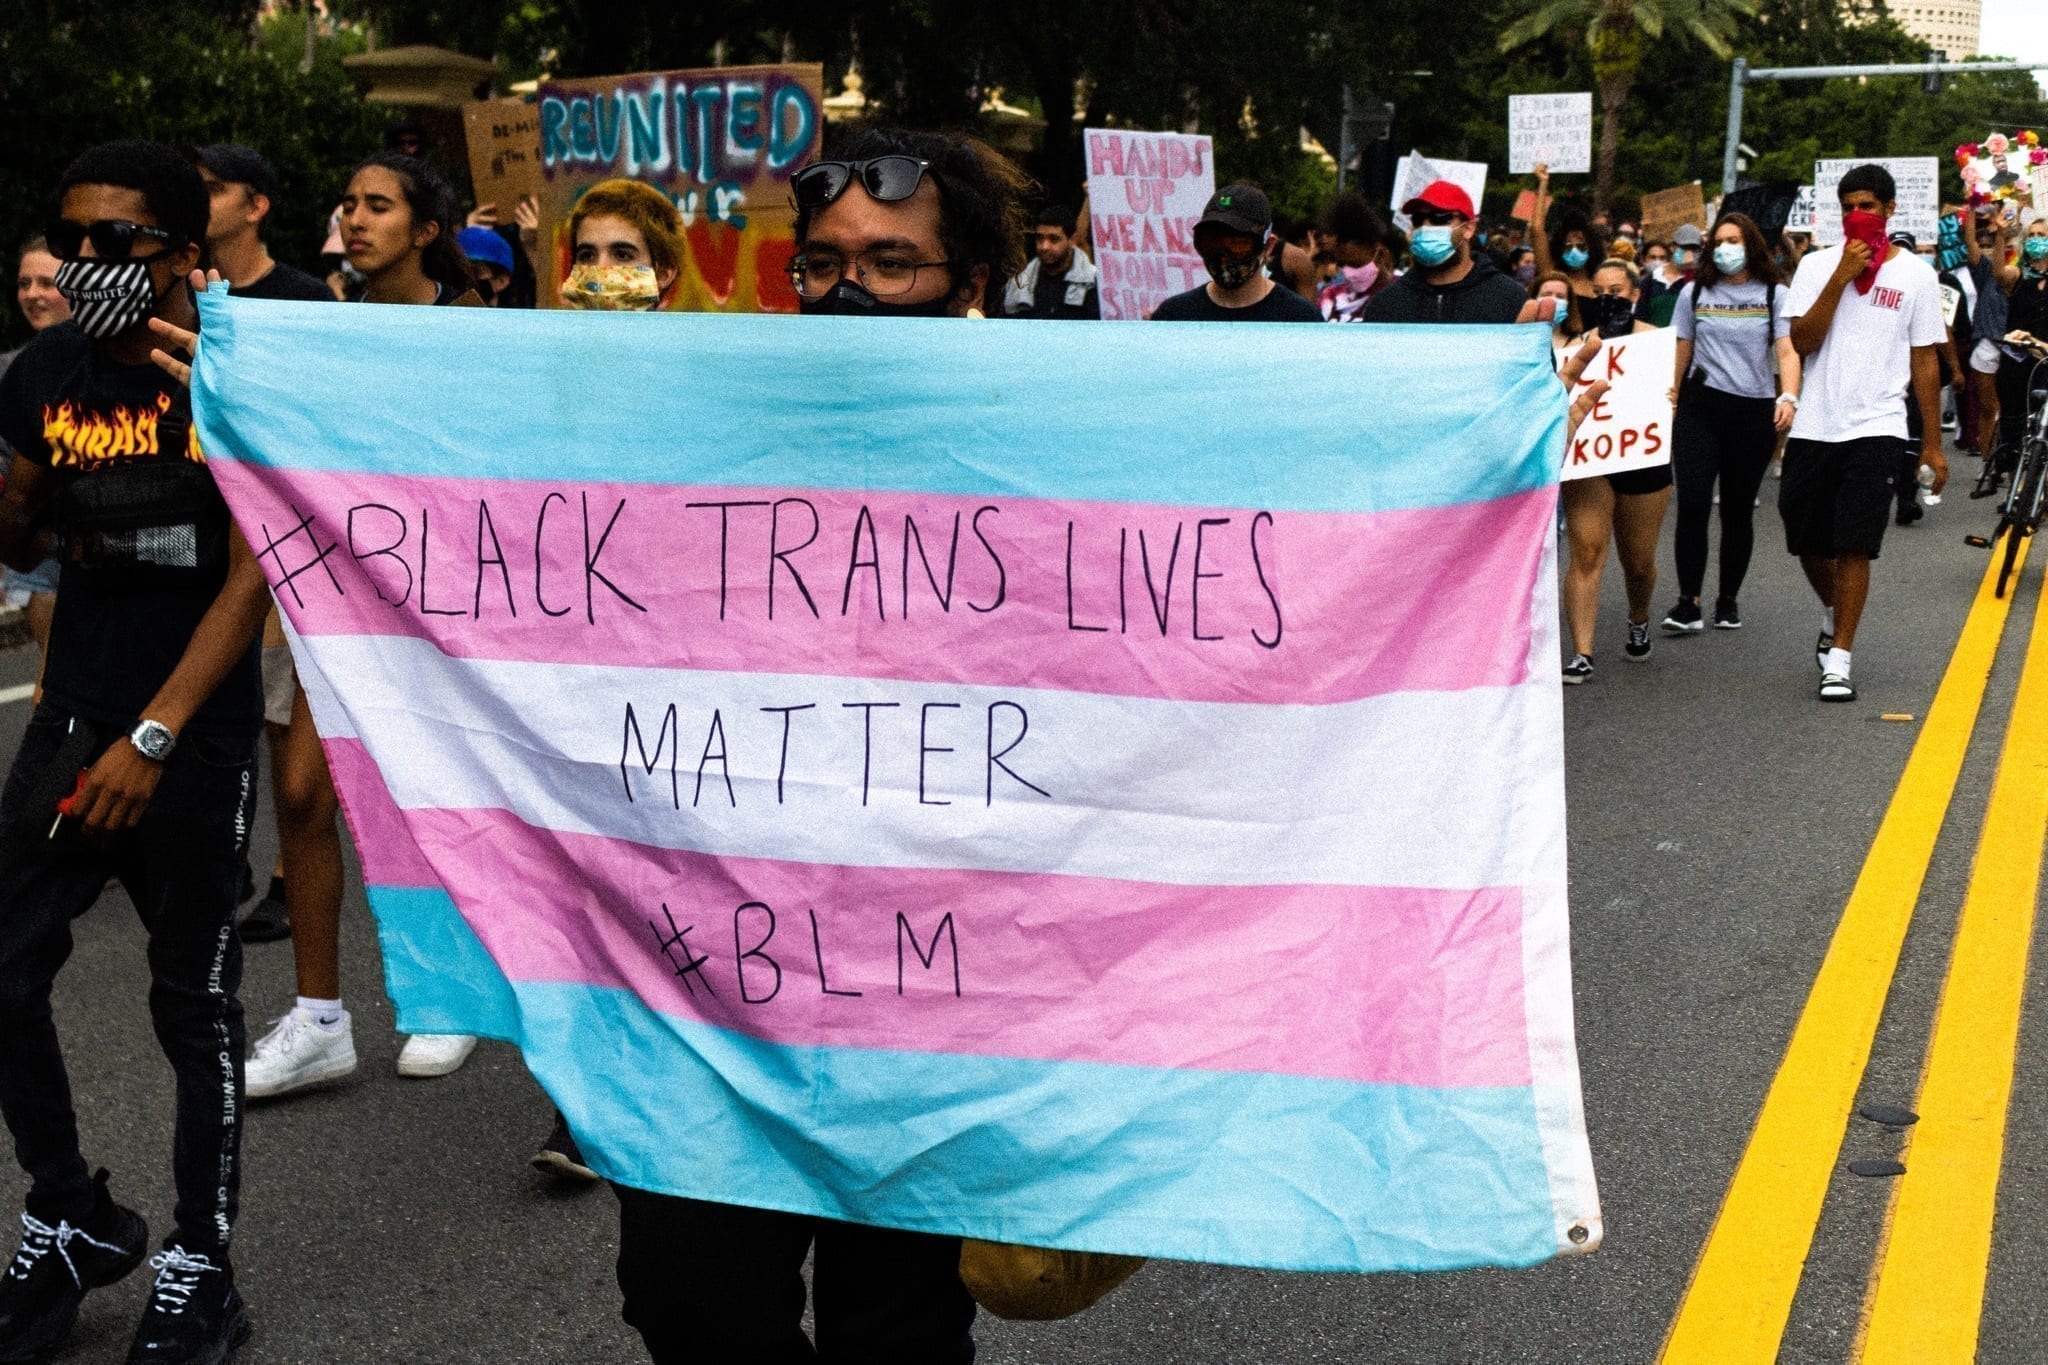 In a protest, a person holds a blue, pink, and white flag that reads "Black Trans Lives Matter BLM"